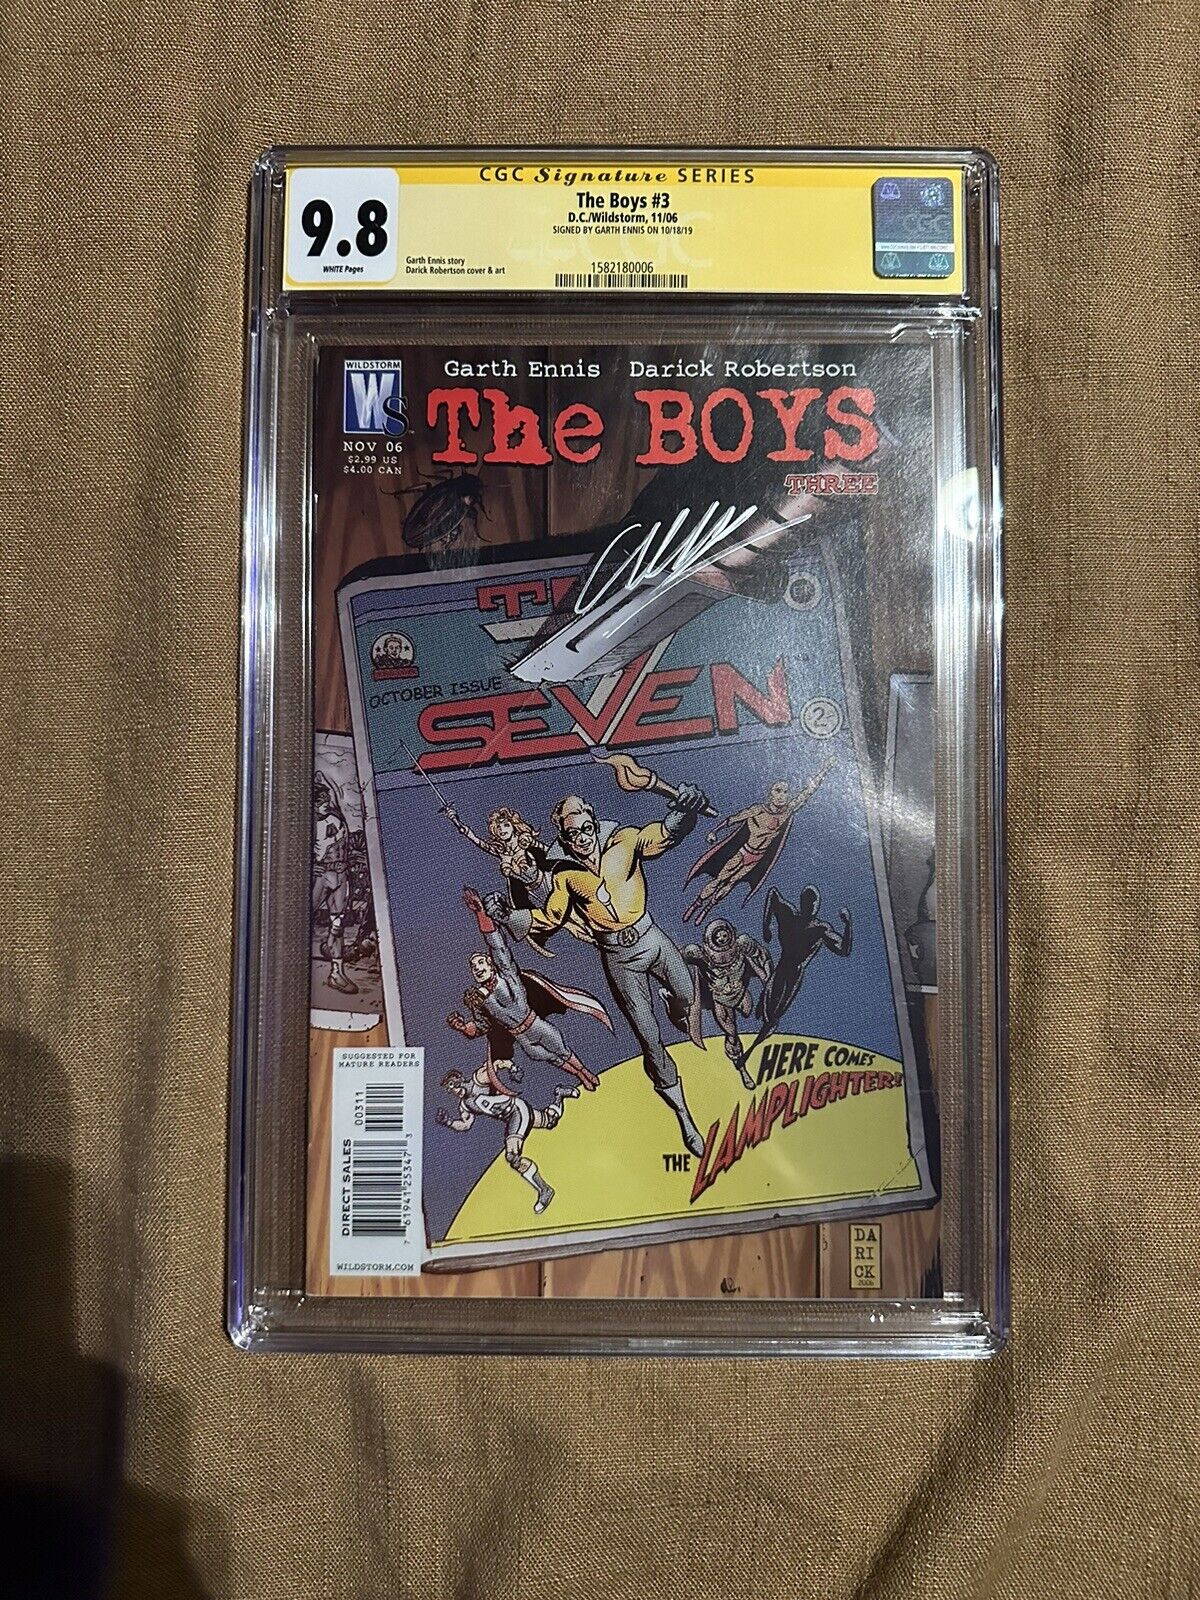 The Boys #3 CGC 9.8 SS Signed by GARTH ENNIS 1st appearance of Homelander NM+